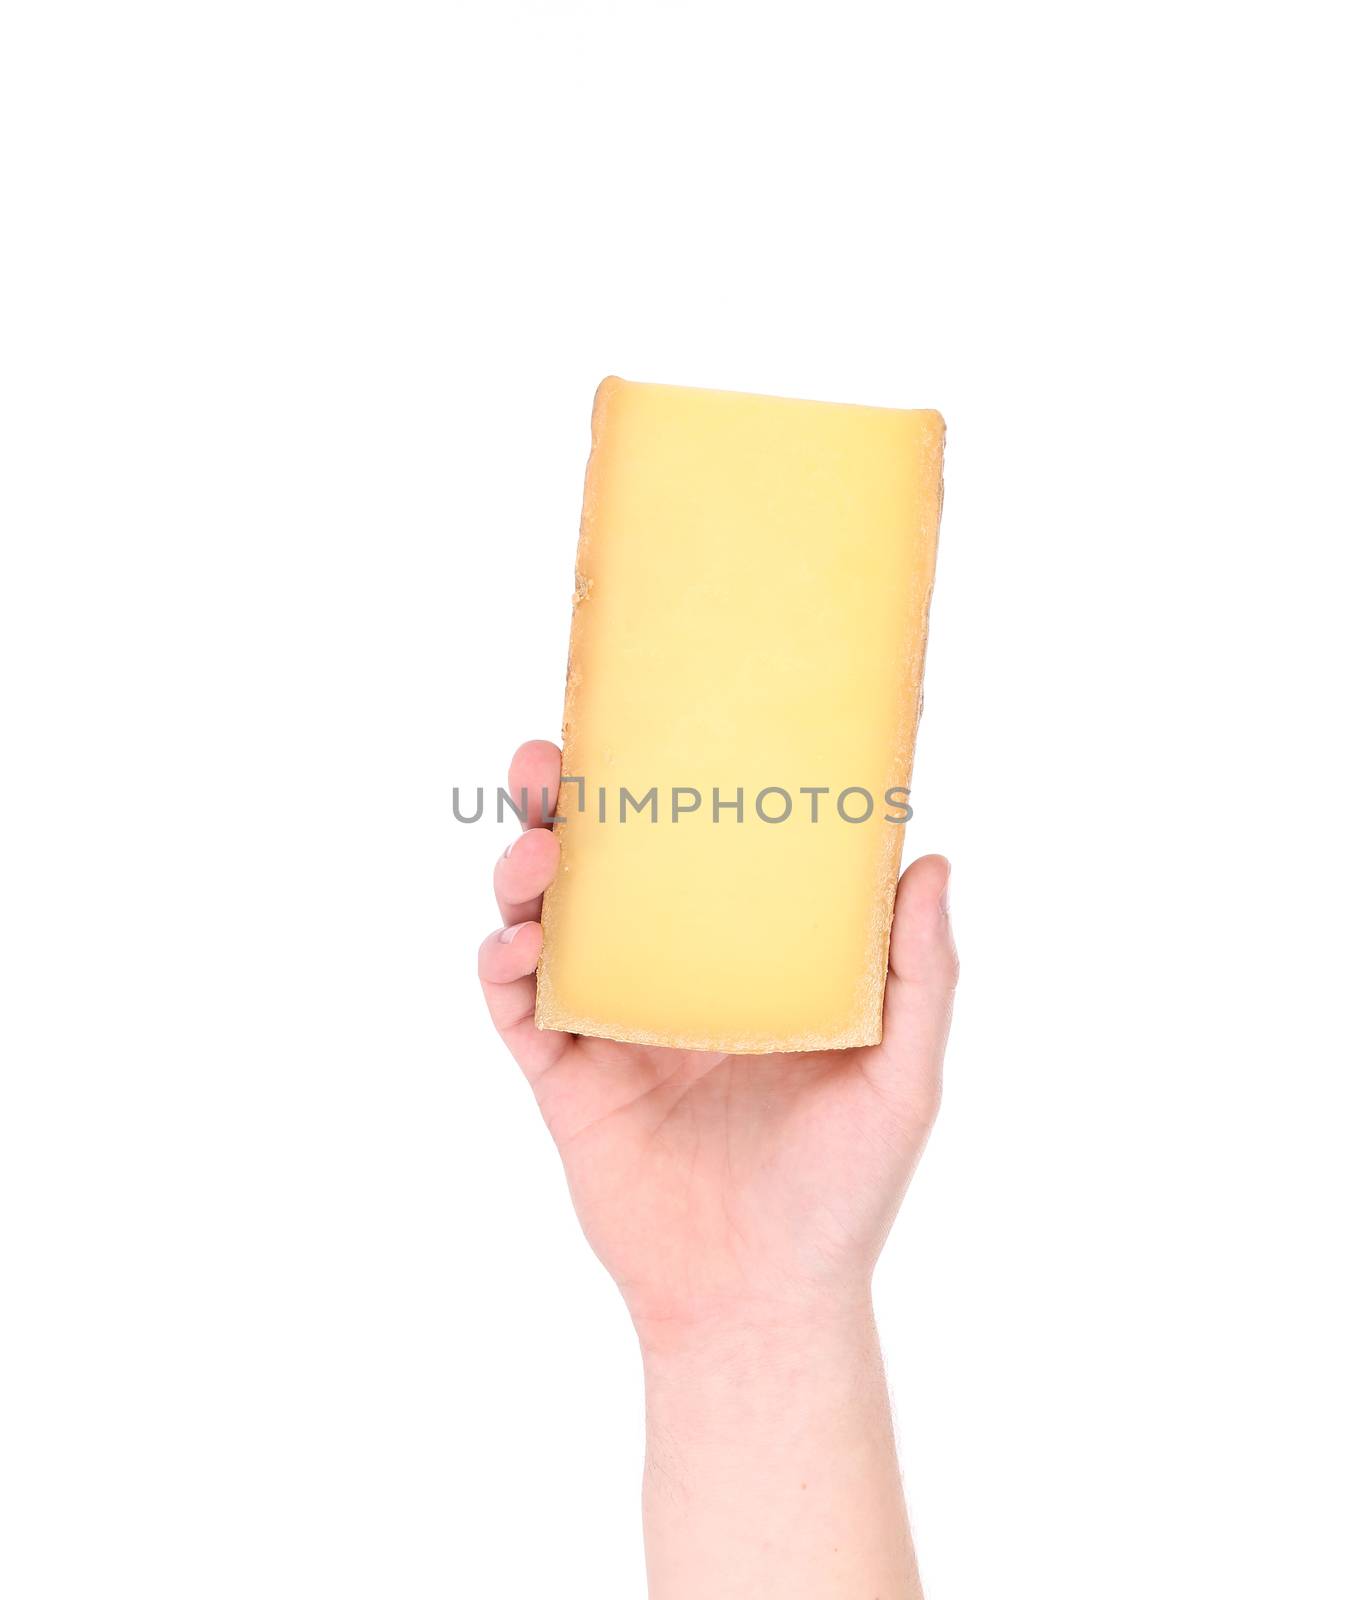 Hand holding block of parmesan cheese. Isolated on a white background.